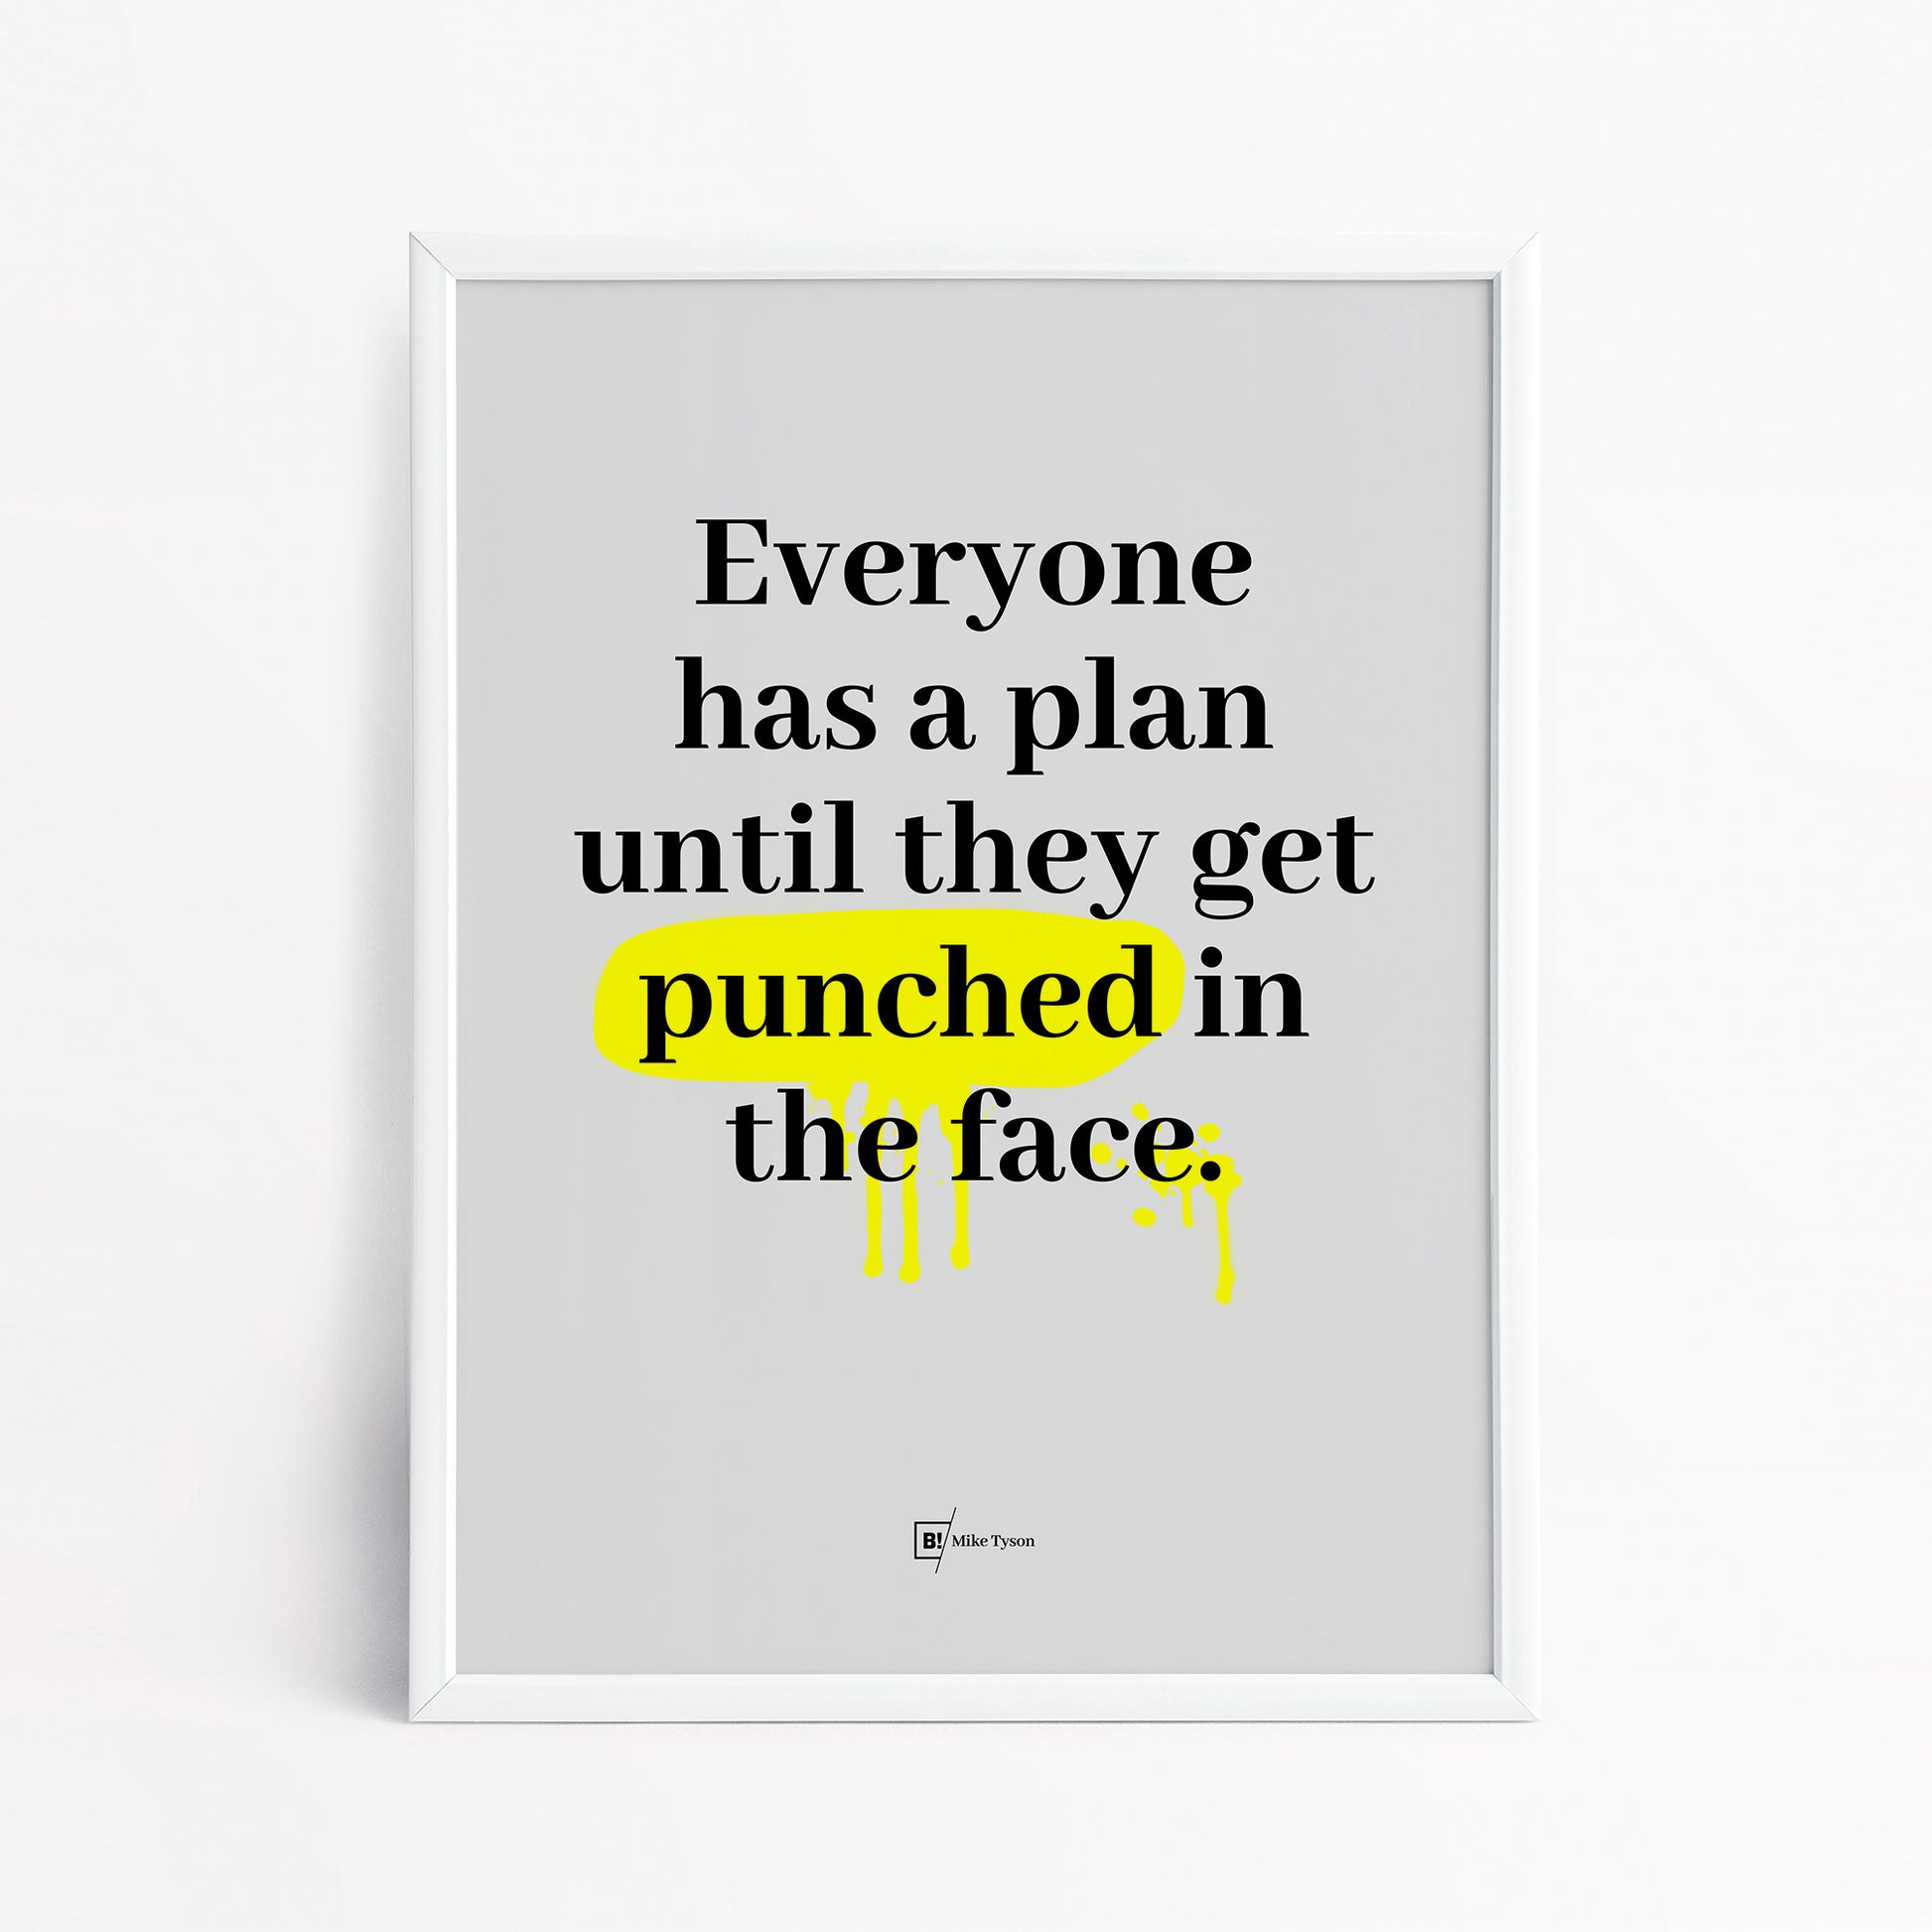 Be inspired by Mike Tyson's famous "Everyone has a plan until they get punched in the face" quote art print. This artwork was printed using the giclée process on archival acid-free paper and is presented in a simple white frame that captures its timeless beauty in every detail.